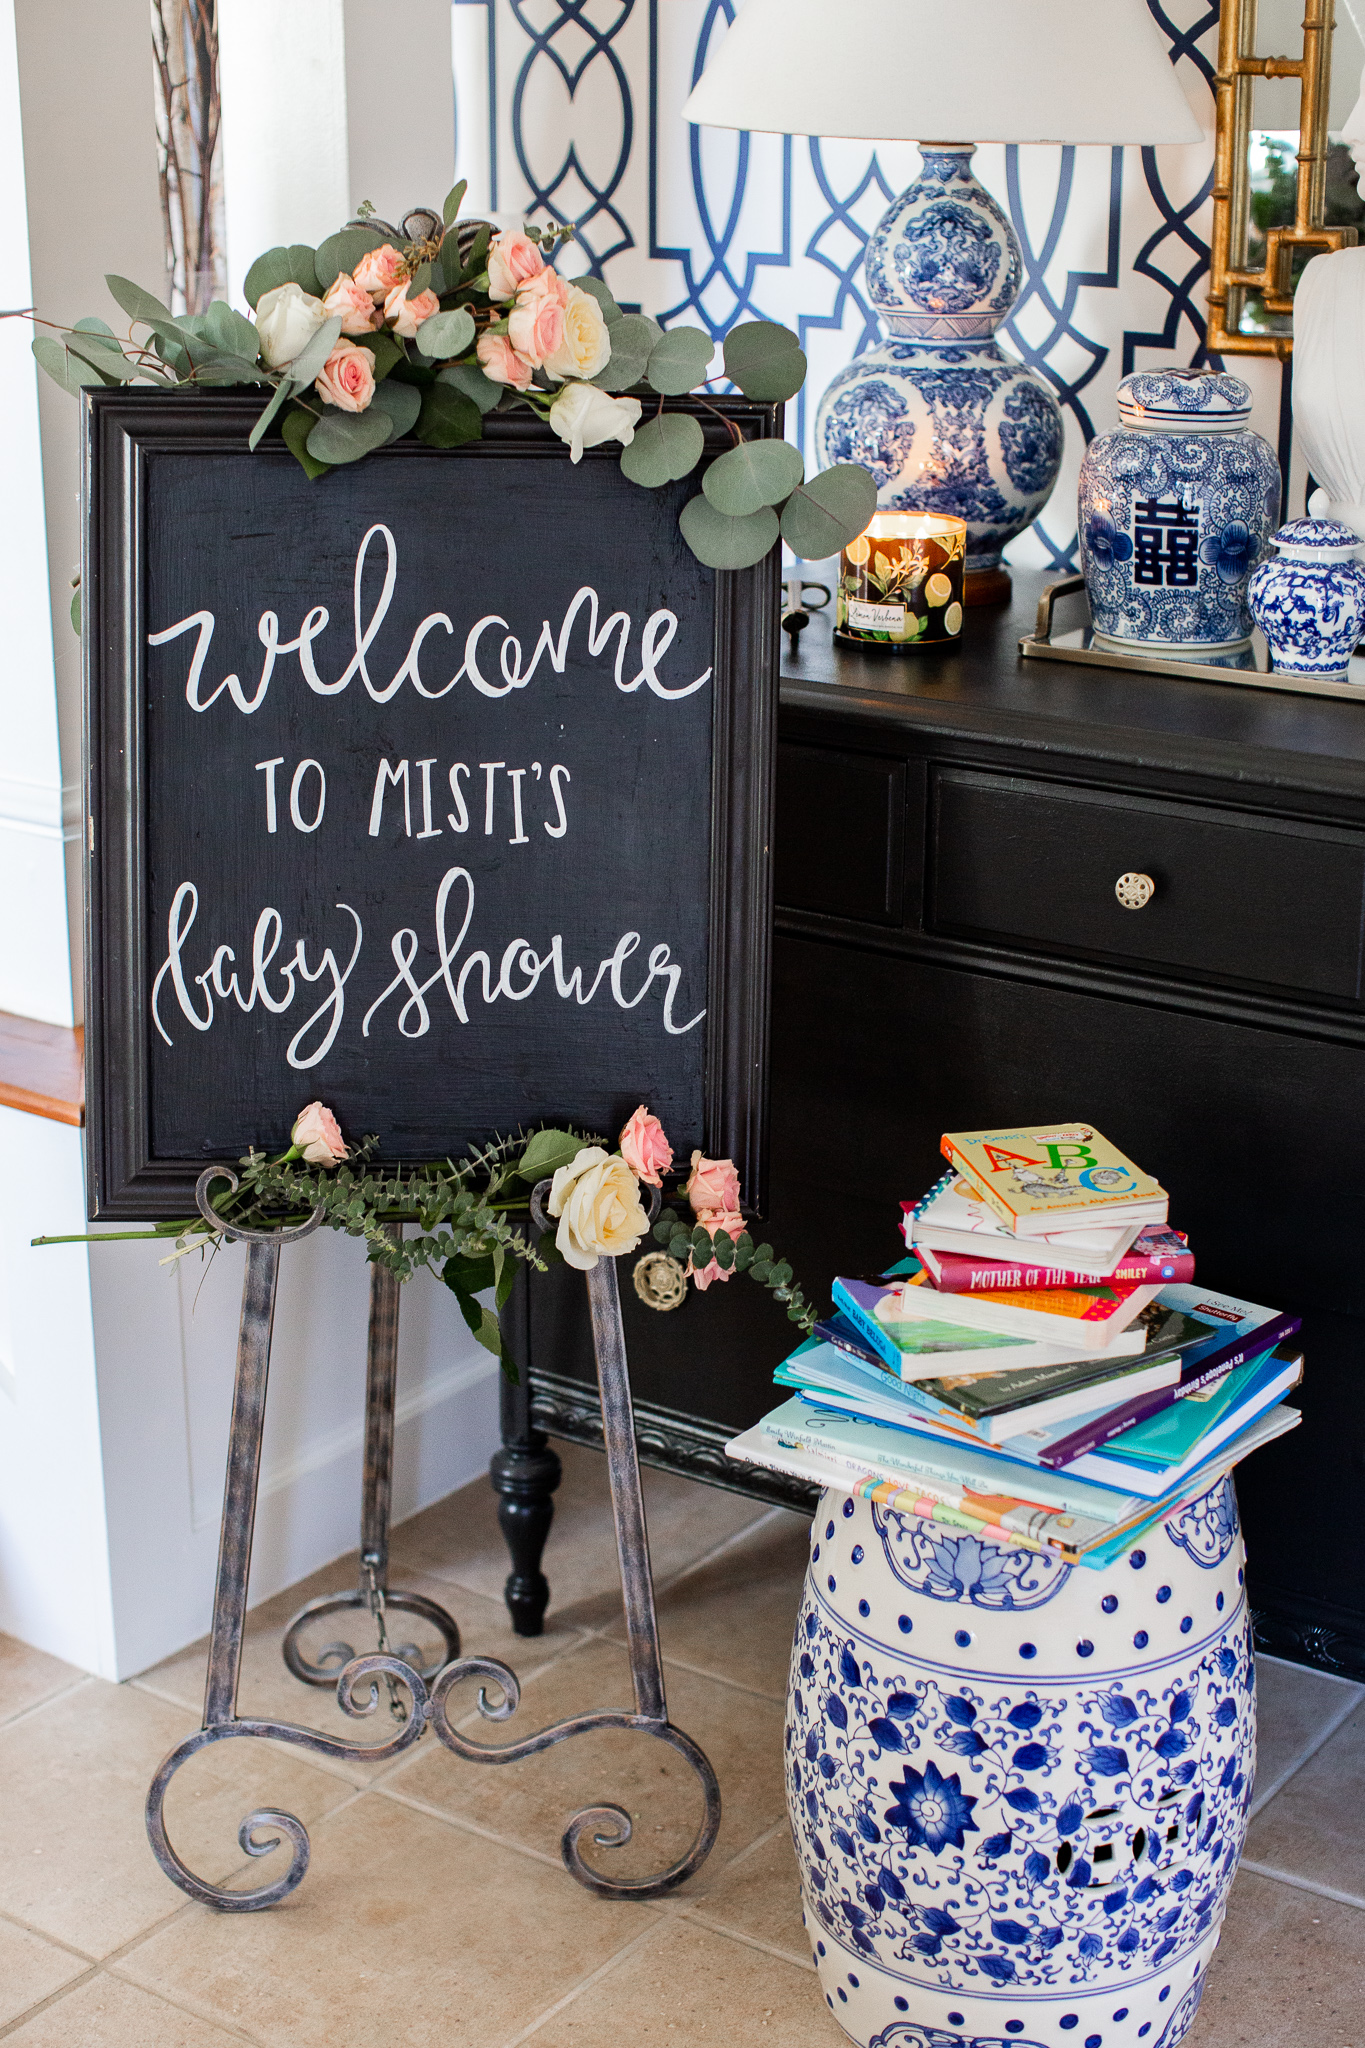  Story Book Baby Shower Ideas by popular North Carolina life and style blog, Coffee Beans and Bobby Pins: image of a chalkboard welcome sign next to a pile of children's picture books.